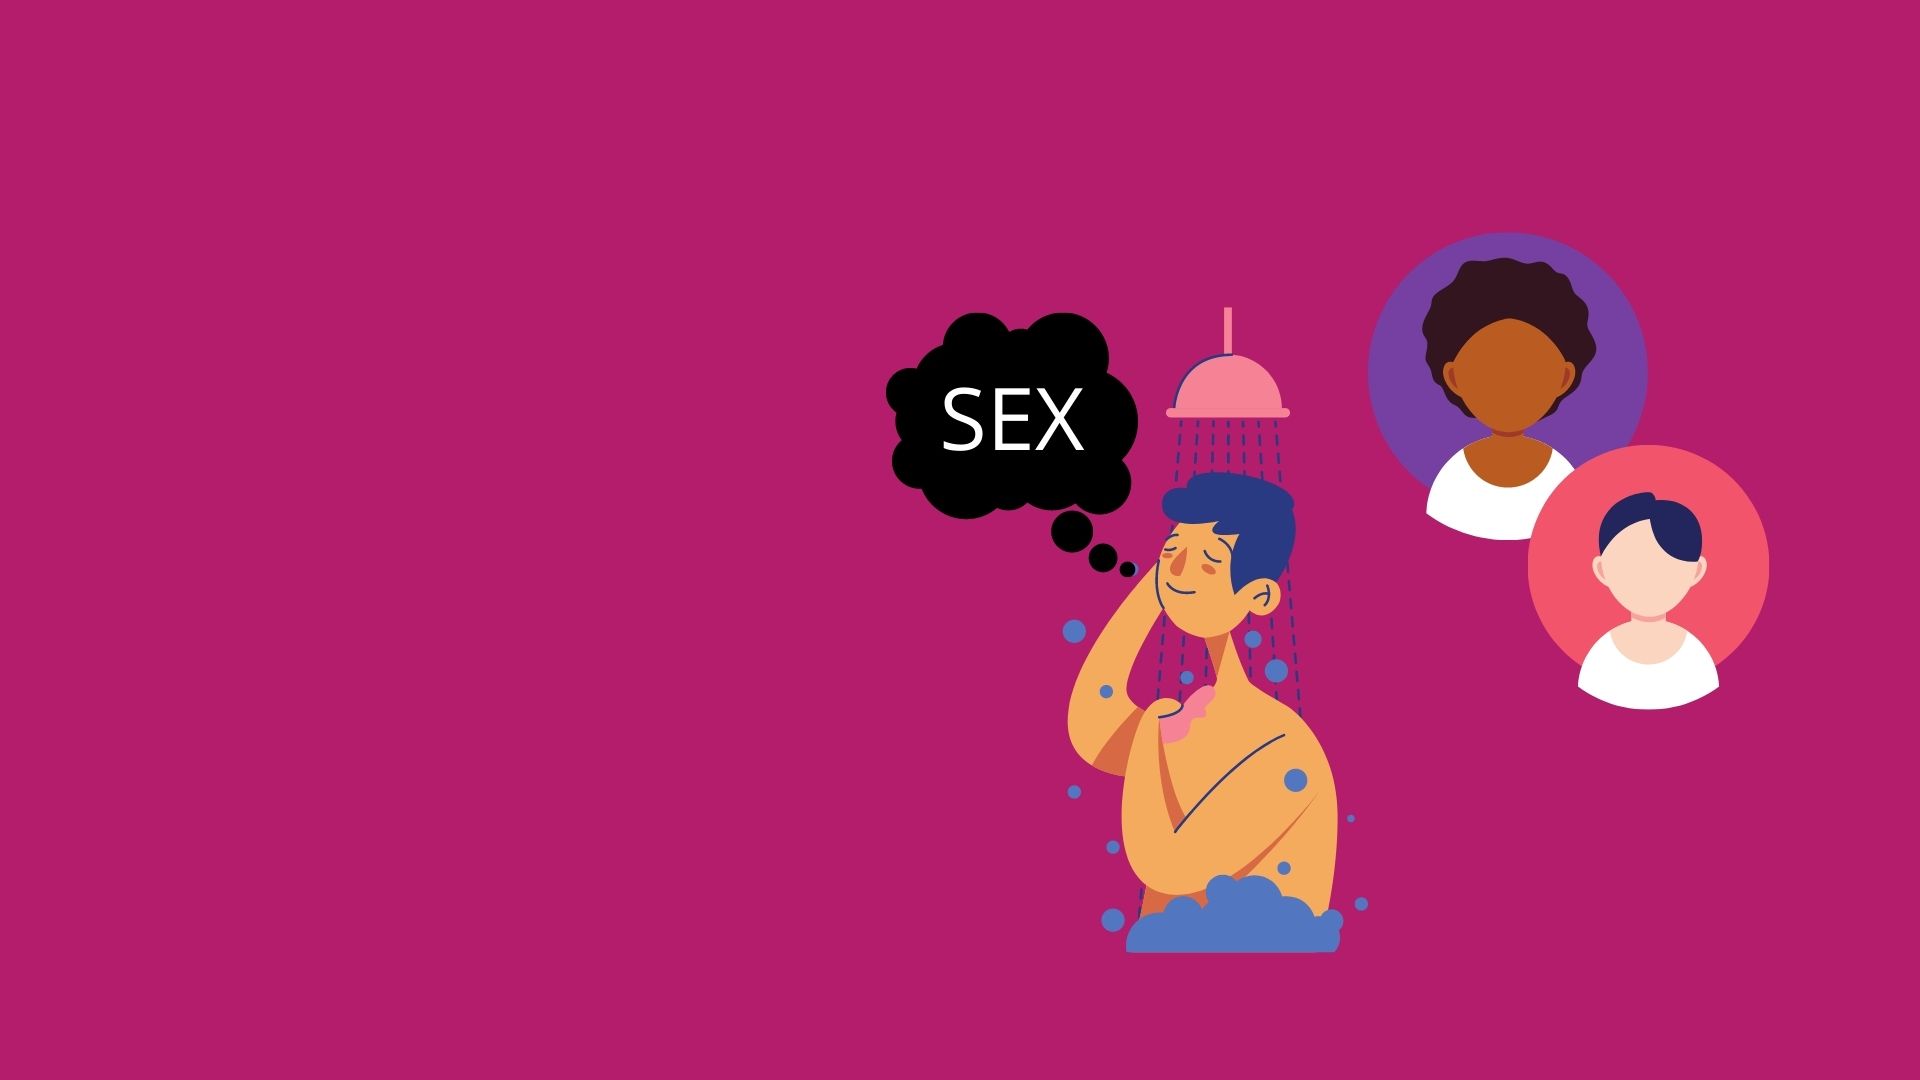 A graphic of a man showering with a thought bubble that say SEX, behind him are two carers